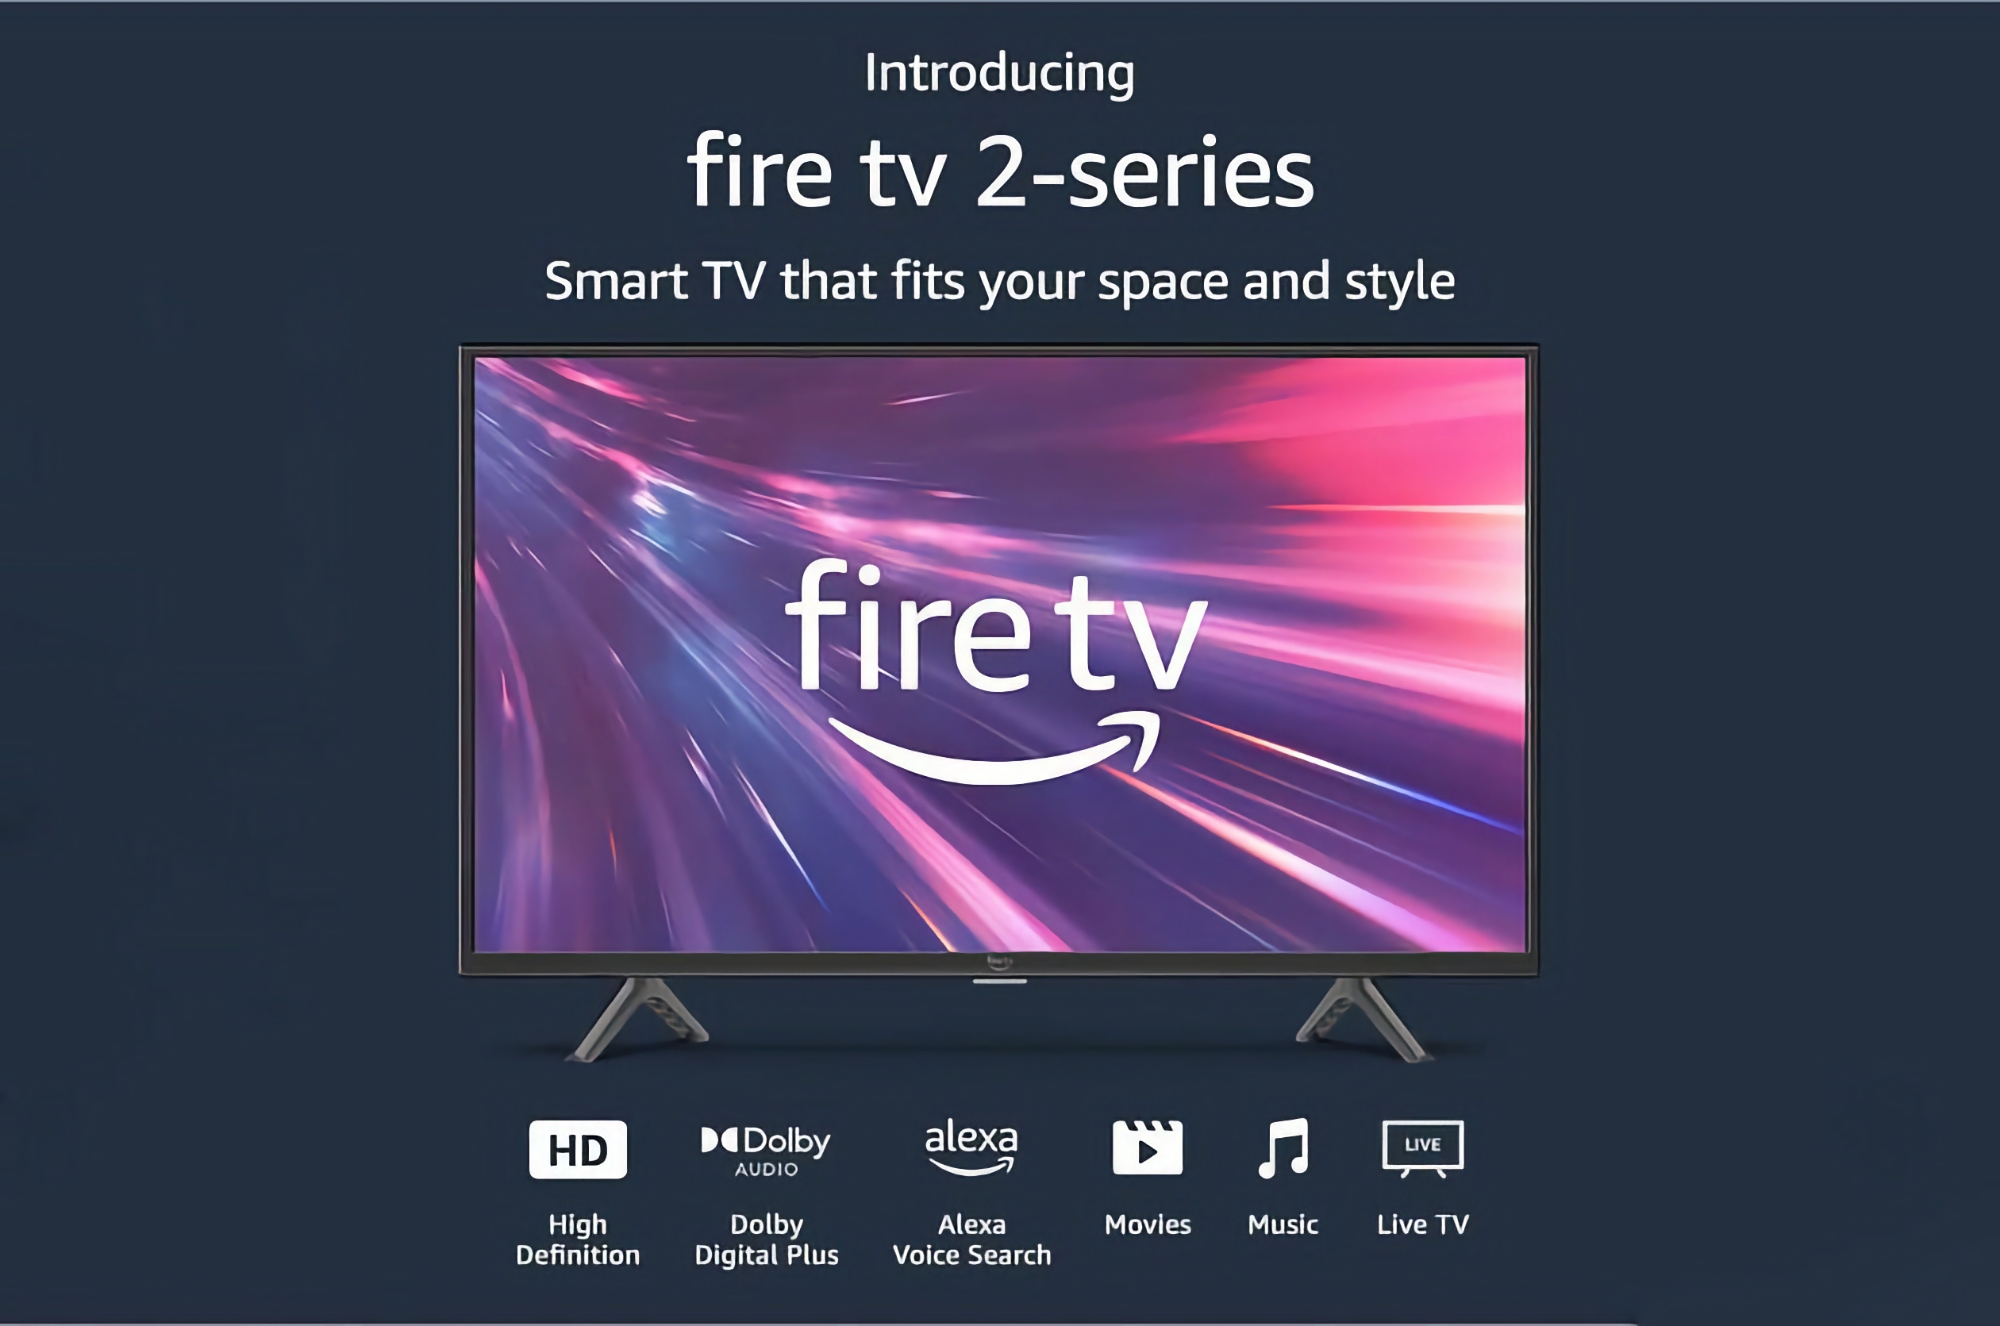 Amazon Fire TV 2 with 32 inch screen at 40% discount